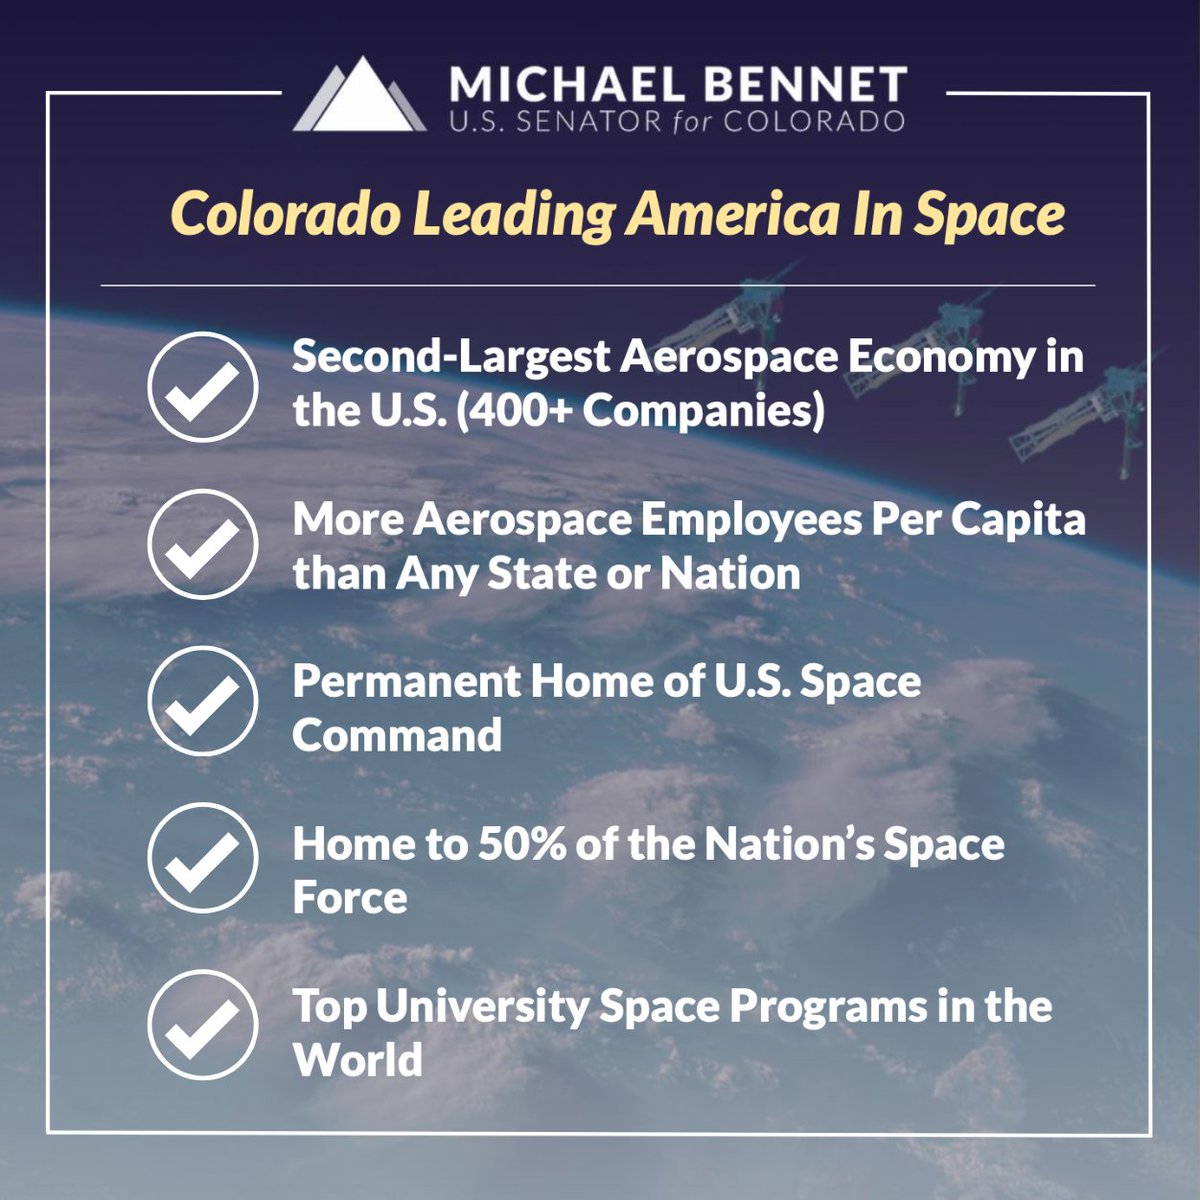 Happy #NationalSpaceDay, Colorado!

With its dynamic aerospace industry, national security capabilities, and world-class university space programs, our state will continue to lead America in space for years to come.